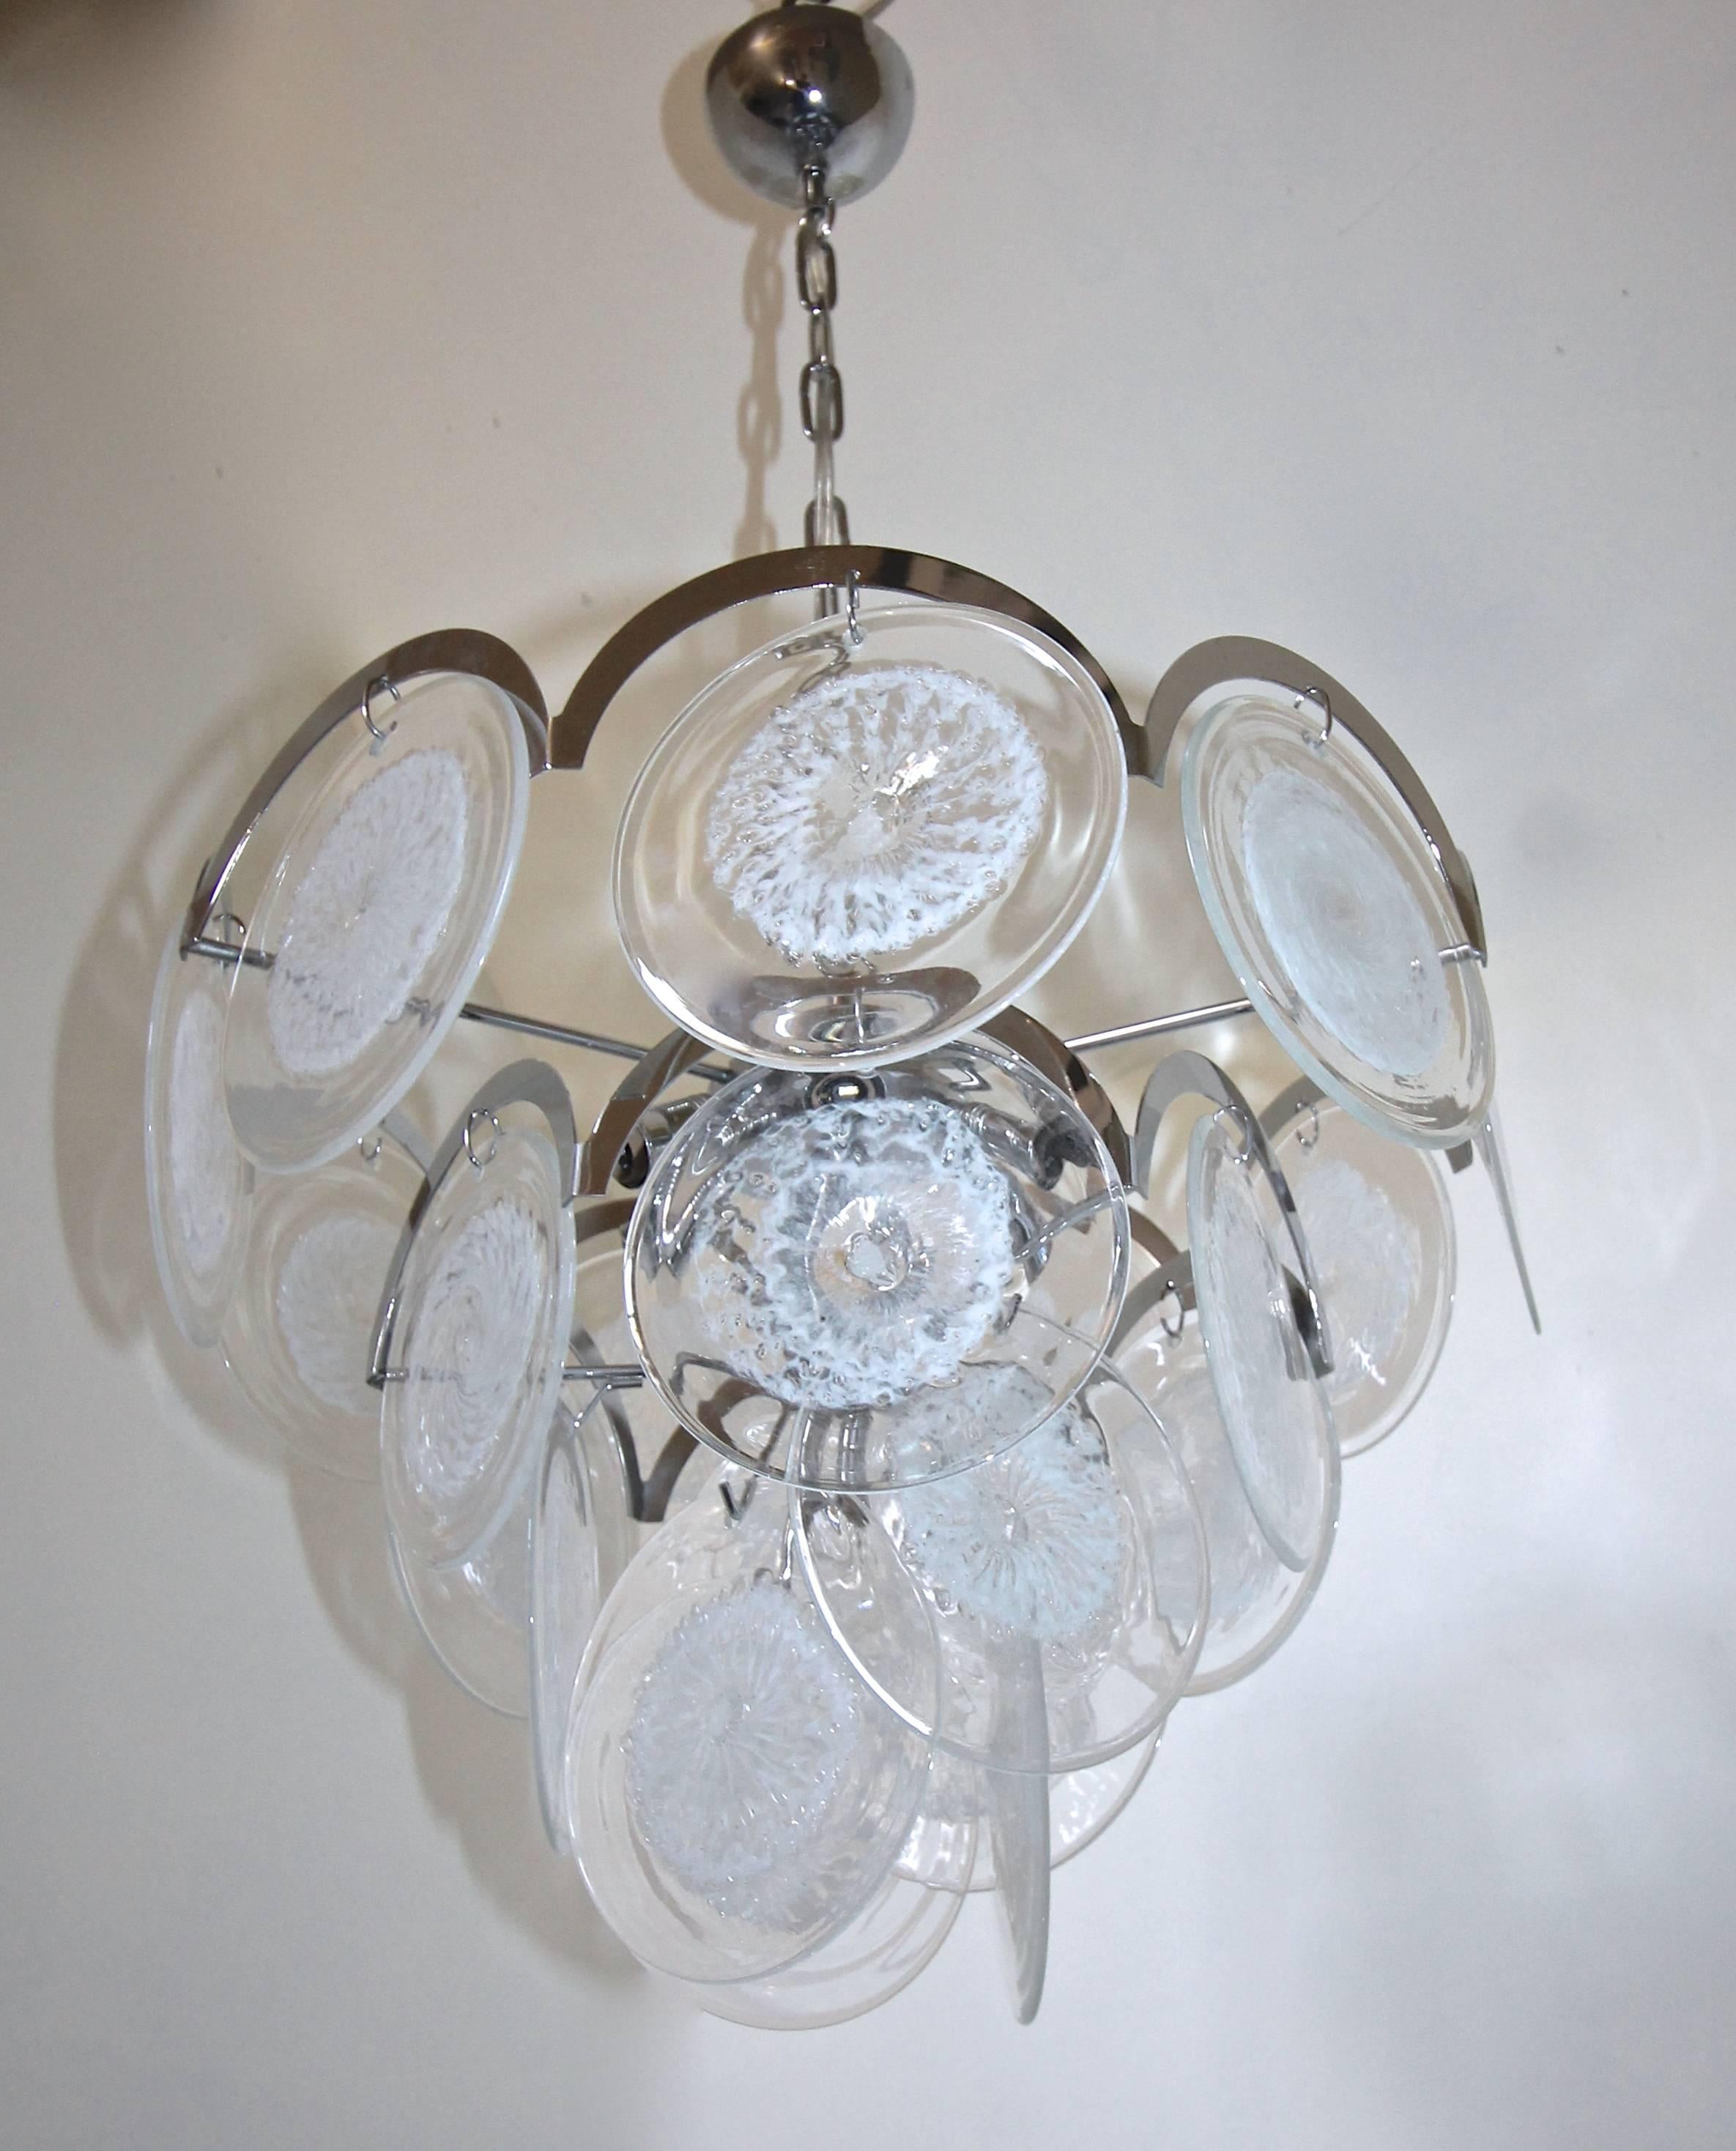 Italian Vistosi style seven-light chandelier with clear and white swirled blown glass discs suspended from a chrome-plated metal frame. Fixture is newly wired and uses seven 40-watt max candelabra base bulbs. Chandelier size 18" dial x 16"